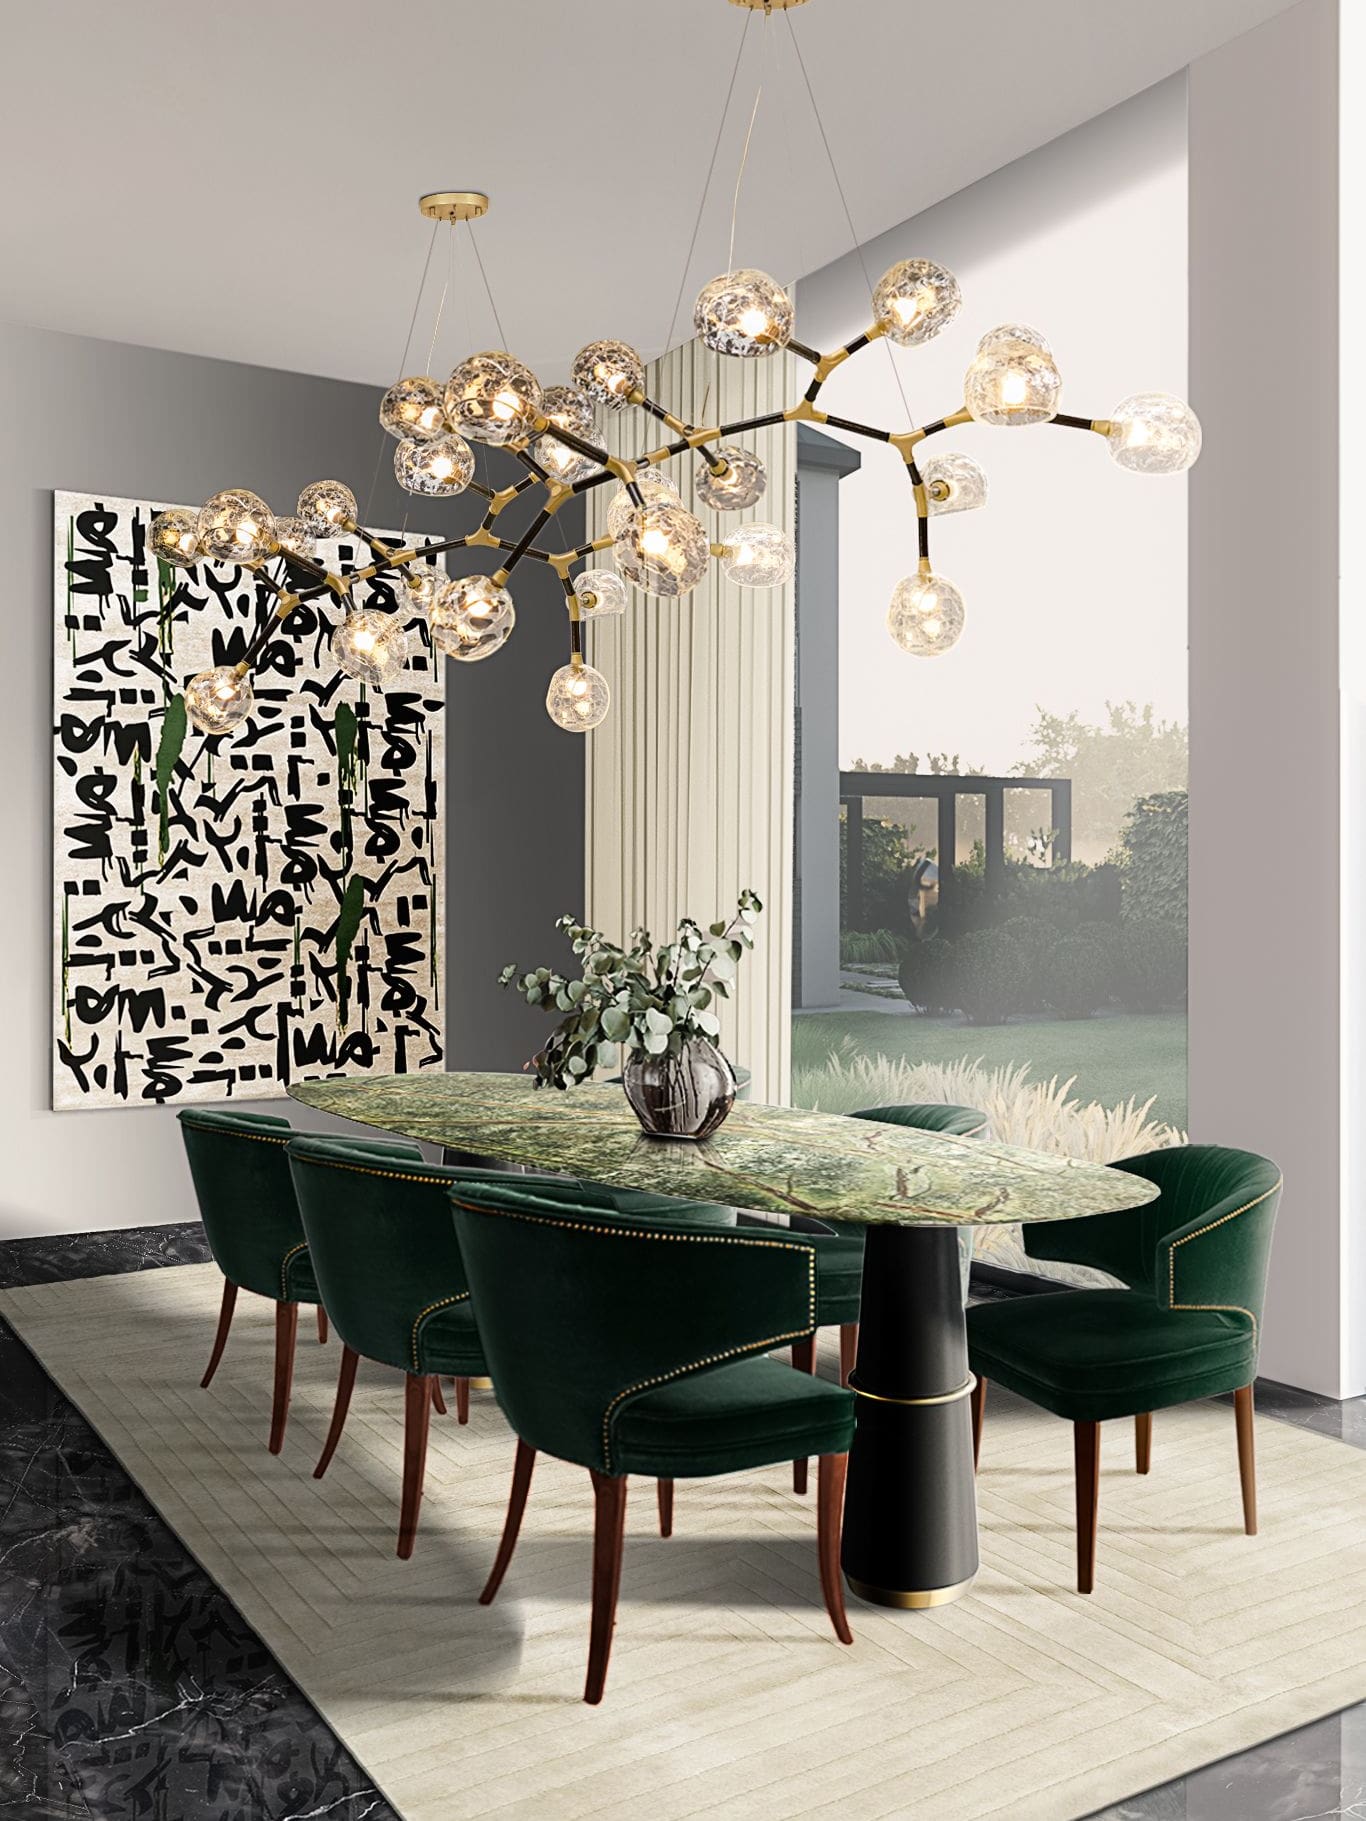 Modern Dining Room Design With Polished Brass - Home'Society